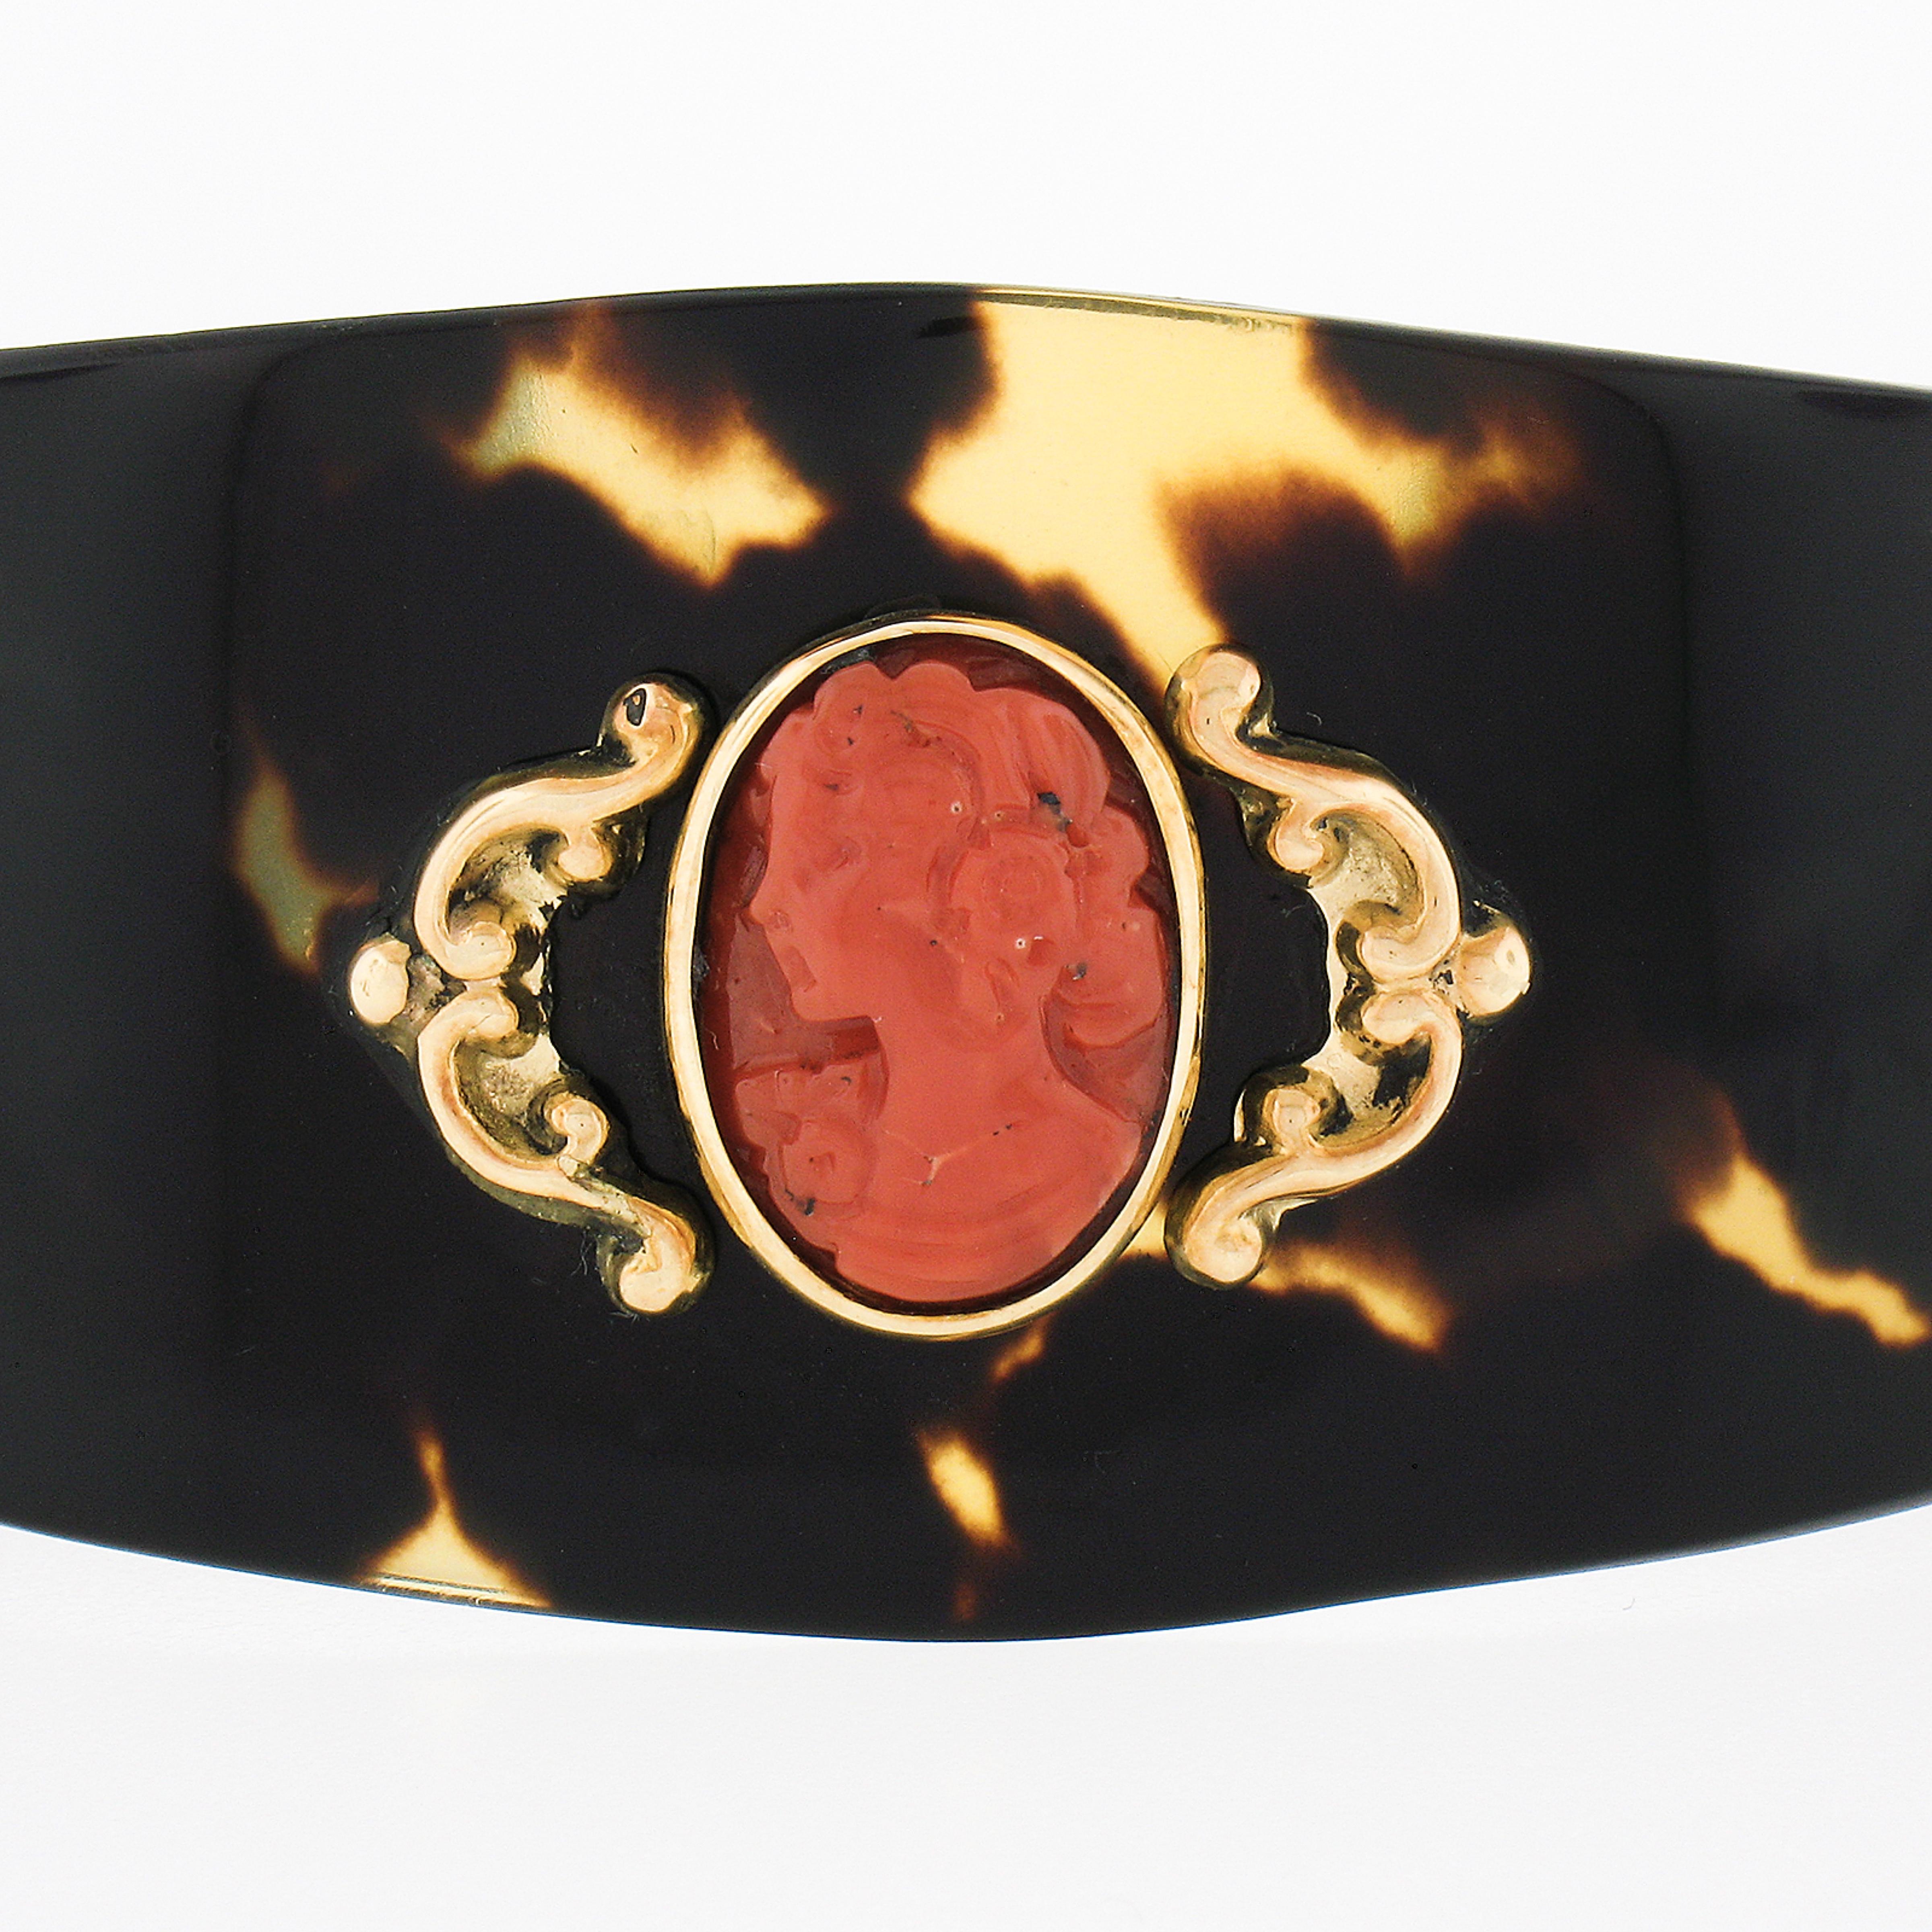 This beautiful, antique, wide cuff bracelet is constructed from lovely black stone that has nice high polished finishing throughout and features a high quality natural coral stone that has been carved into, showing a beautiful woman with wonderful